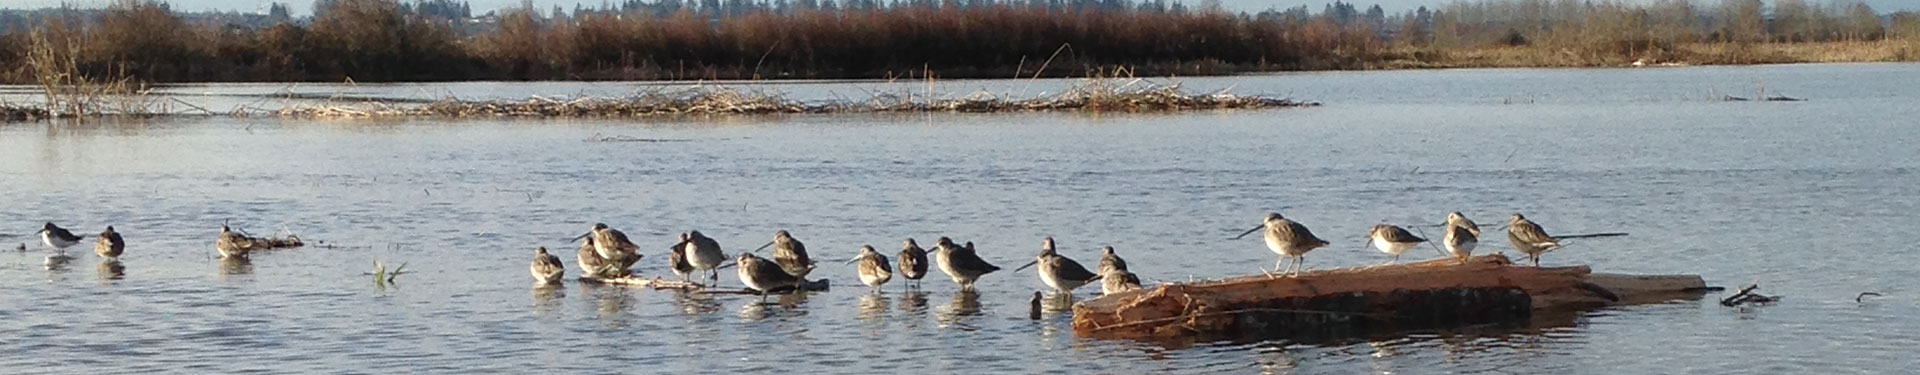 Tulalip Natural Resources Department close up image of shorebirds in nearby restored habitat